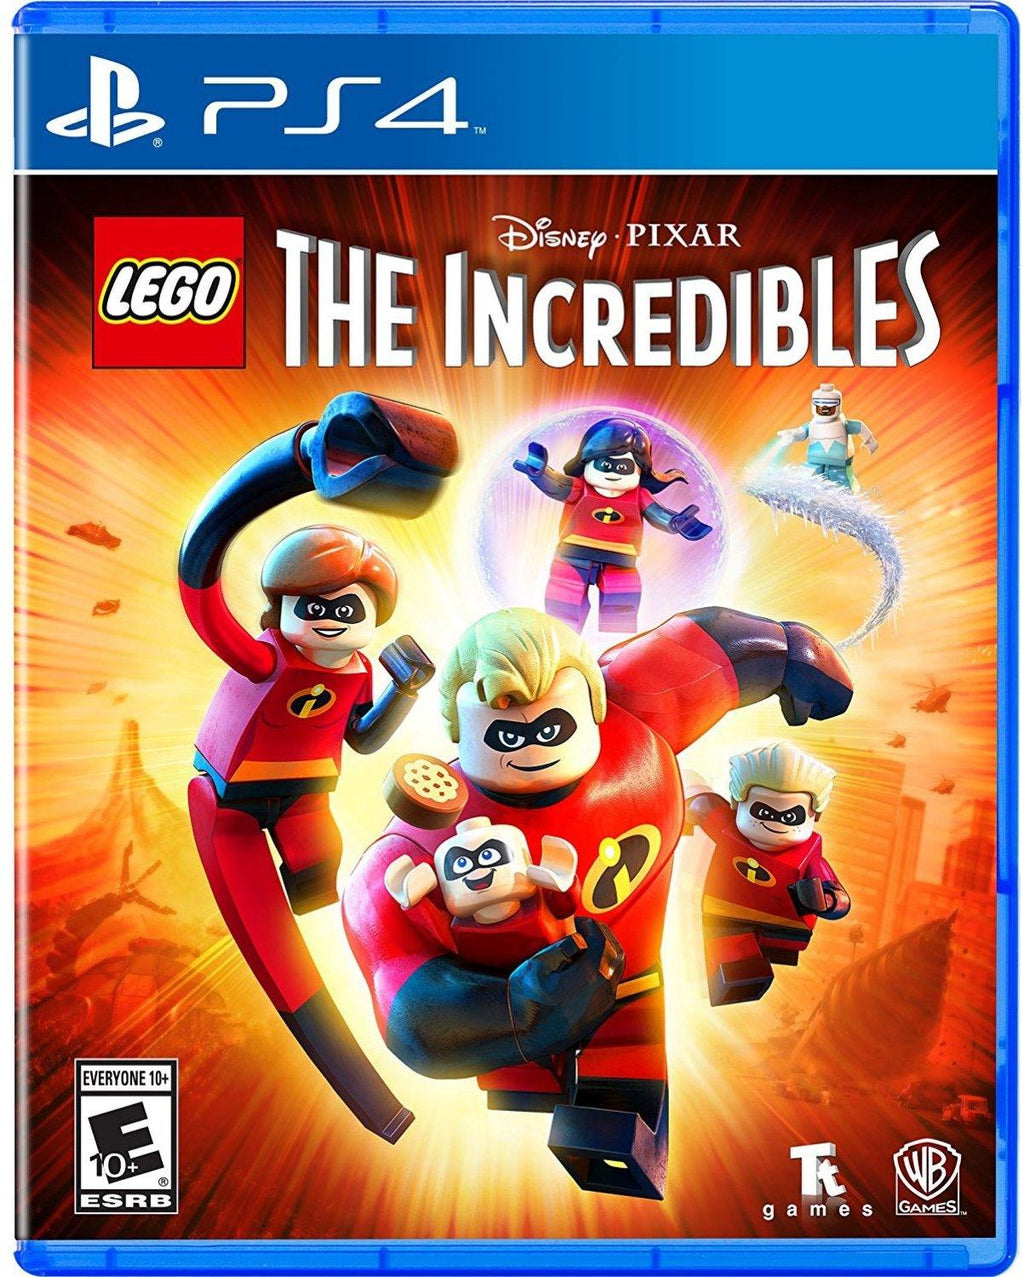 ps4 lego video games